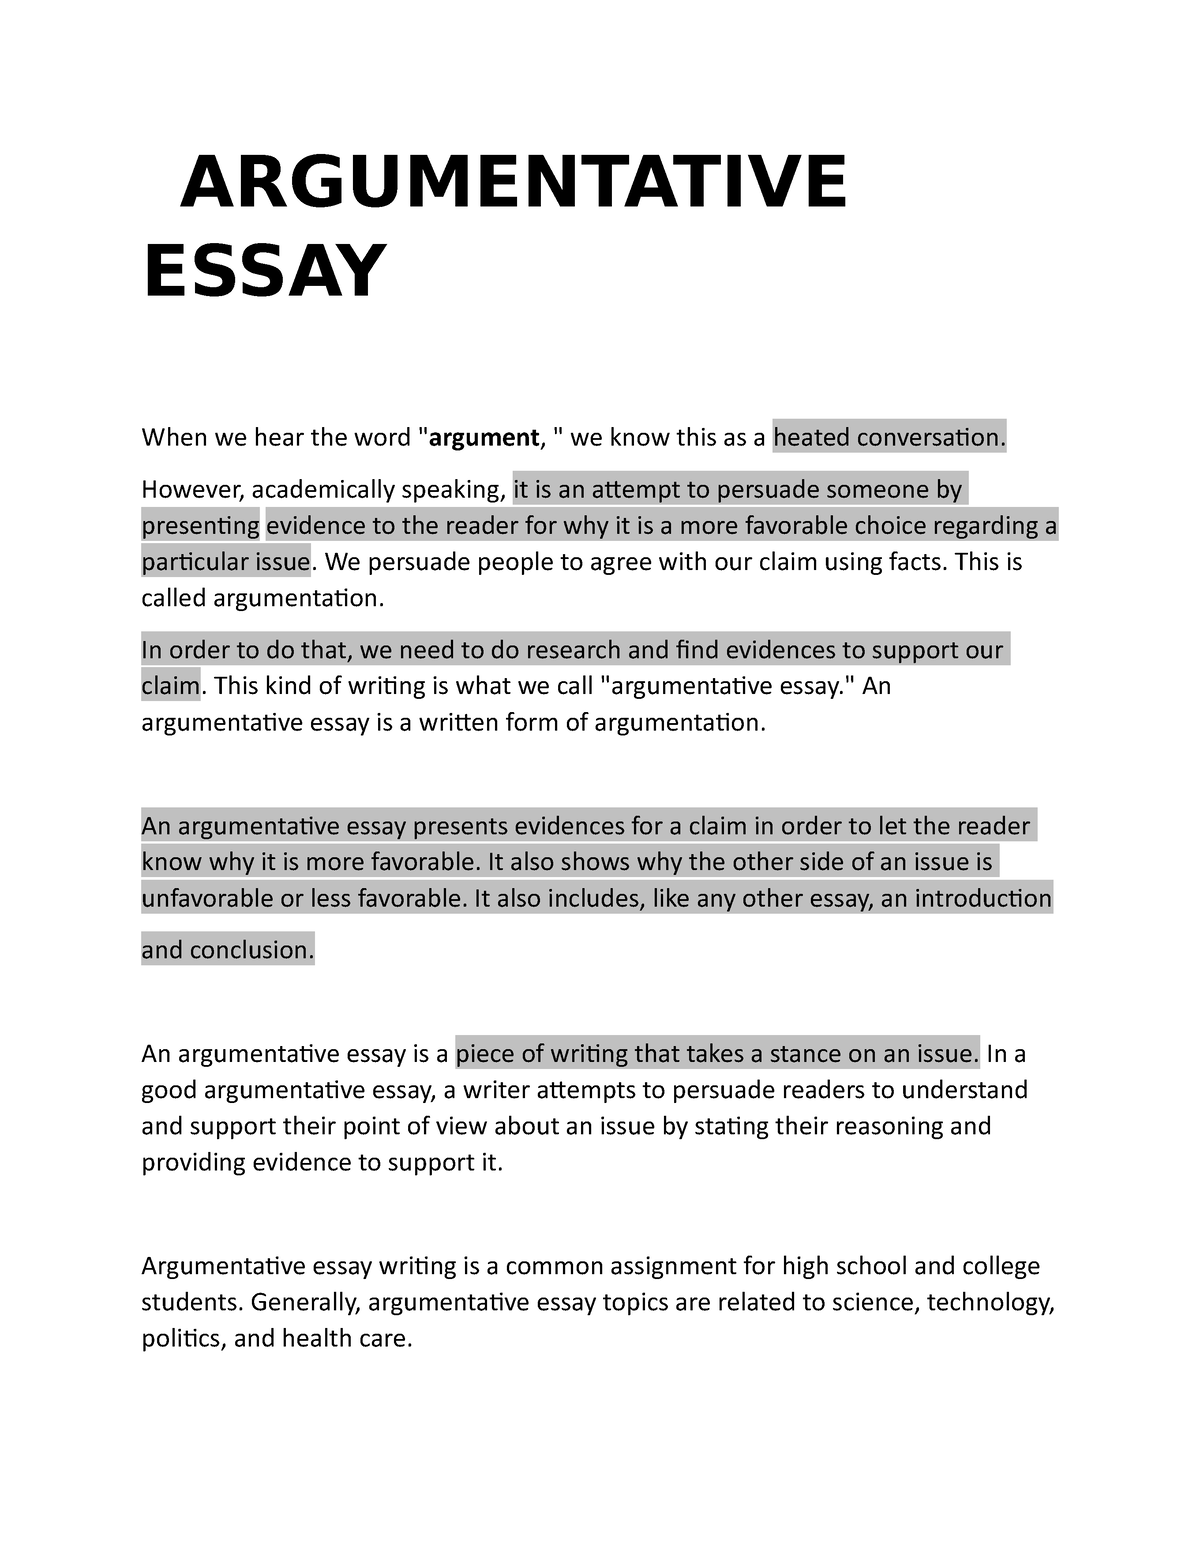 what is a rebuttal in an argumentative essay